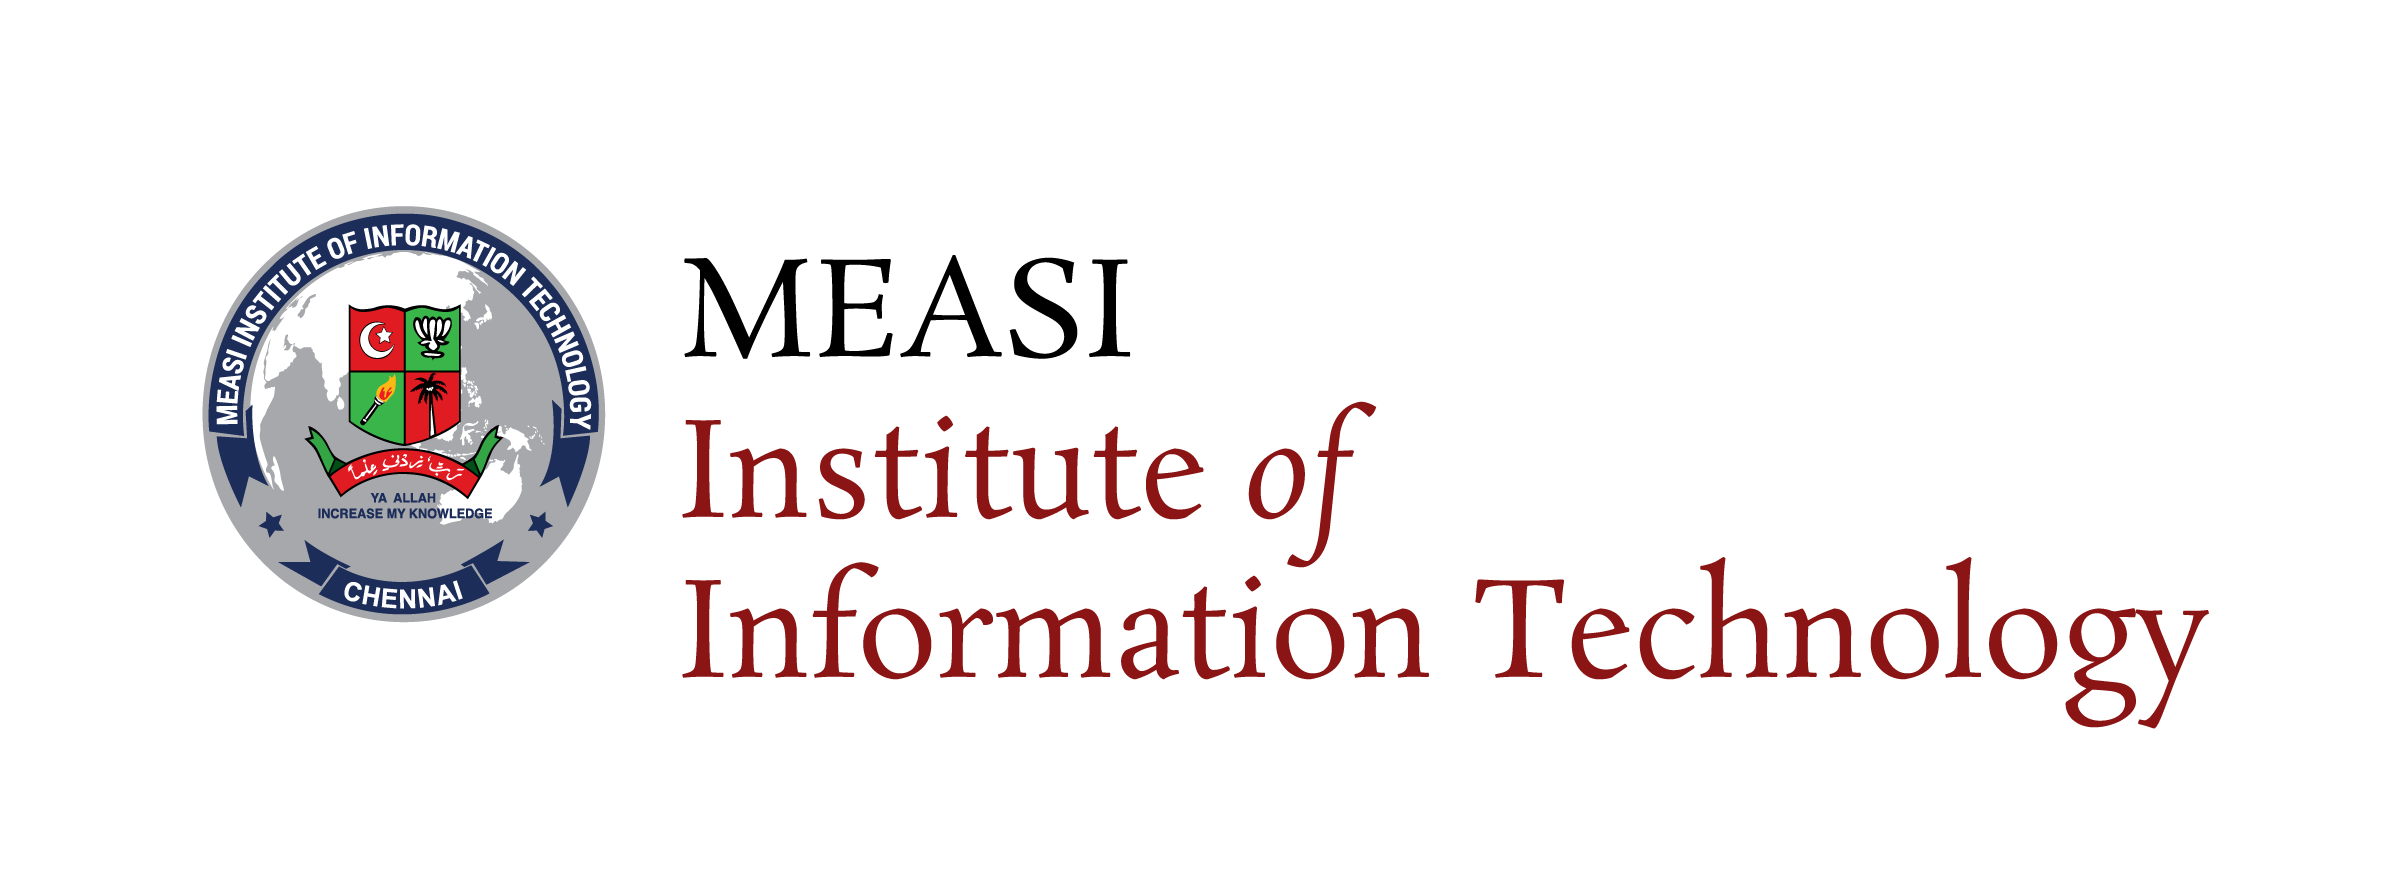 MEASI INSTITUTE OF INFORMATION TECHNOLOGY